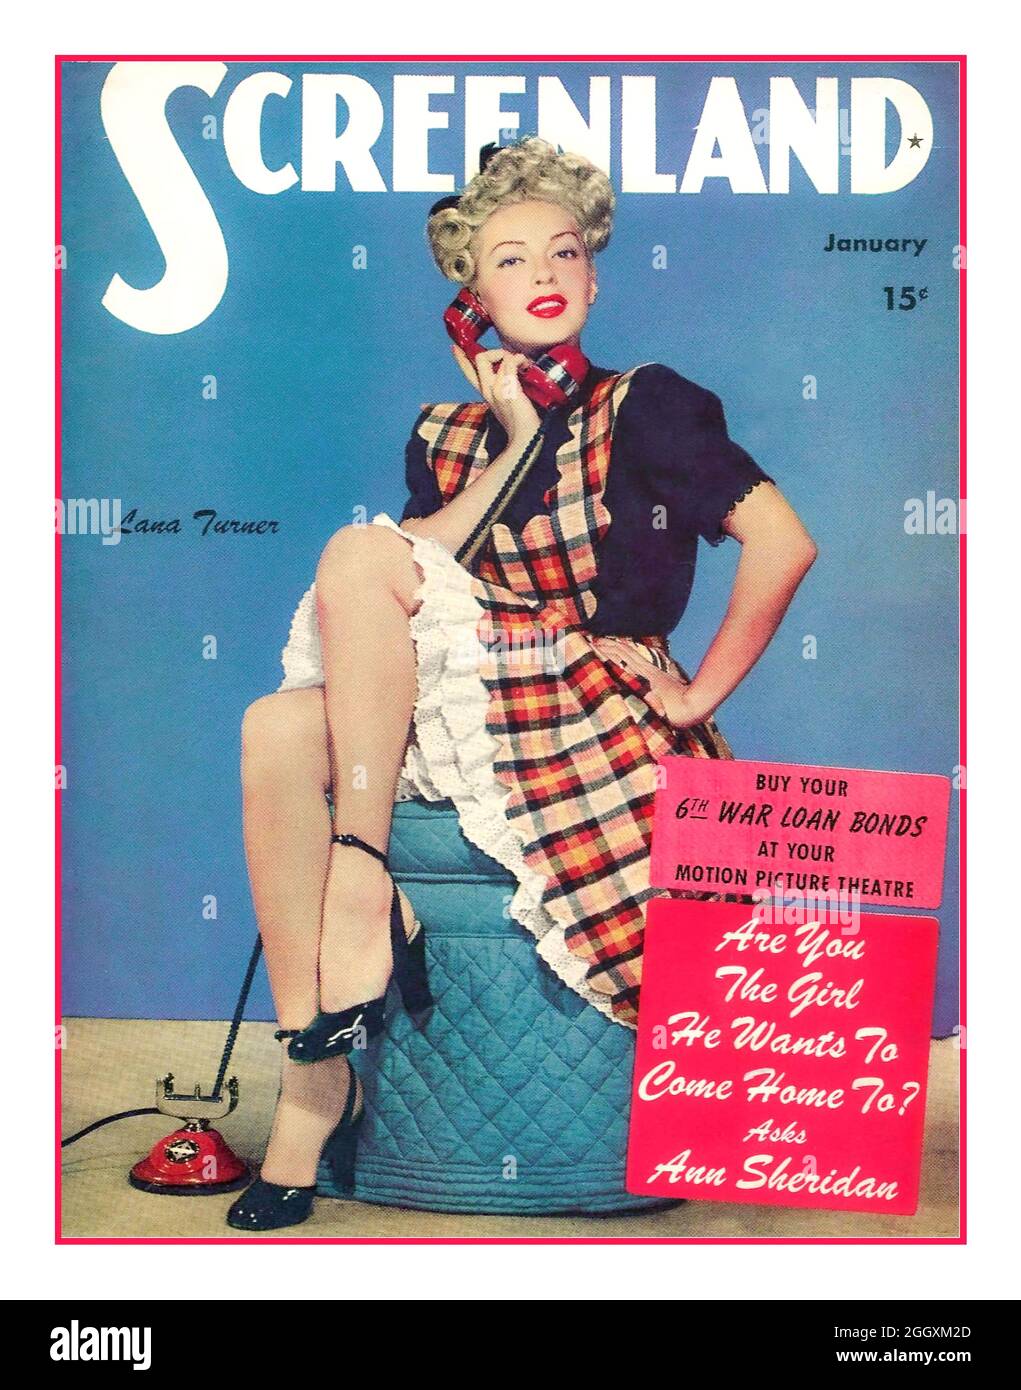 WW2 Lana Turner on the cover of Screenland magazine, January 1945. Movie magazine, Vintage movies, Lana Turner Screenland was a monthly U.S. magazine about movies, published between September 1920 and June 1971, Stock Photo